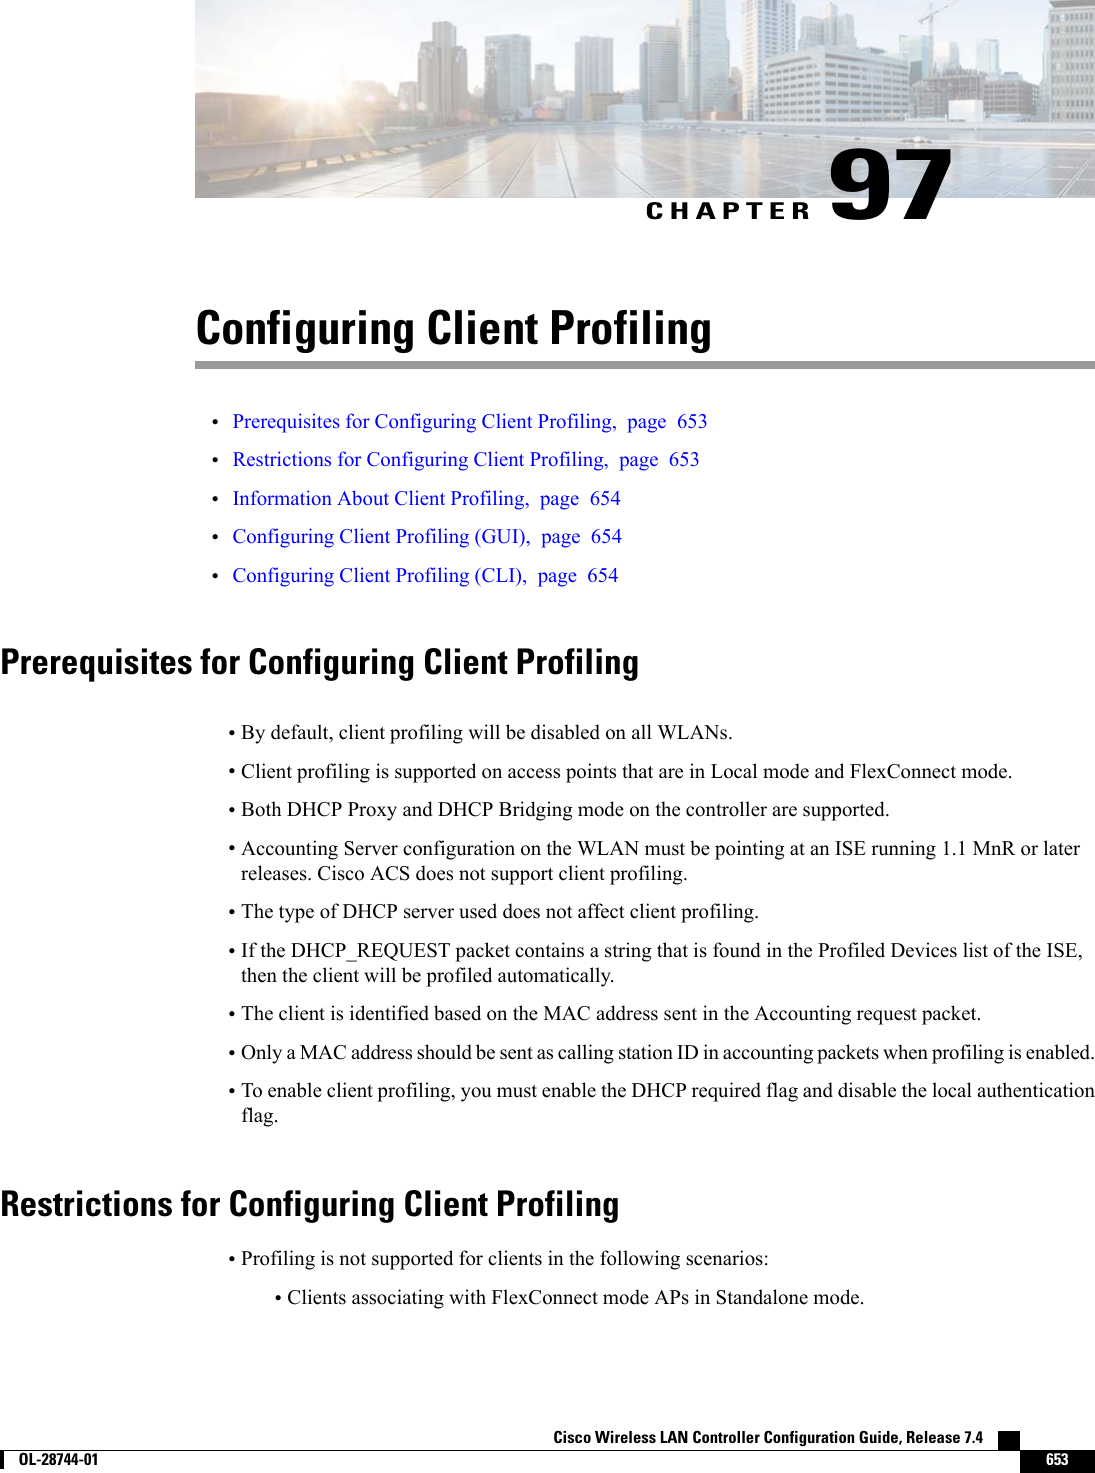 CHAPTER 97Configuring Client Profiling•Prerequisites for Configuring Client Profiling, page 653•Restrictions for Configuring Client Profiling, page 653•Information About Client Profiling, page 654•Configuring Client Profiling (GUI), page 654•Configuring Client Profiling (CLI), page 654Prerequisites for Configuring Client Profiling•By default, client profiling will be disabled on all WLANs.•Client profiling is supported on access points that are in Local mode and FlexConnect mode.•Both DHCP Proxy and DHCP Bridging mode on the controller are supported.•Accounting Server configuration on the WLAN must be pointing at an ISE running 1.1 MnR or laterreleases. Cisco ACS does not support client profiling.•The type of DHCP server used does not affect client profiling.•If the DHCP_REQUEST packet contains a string that is found in the Profiled Devices list of the ISE,then the client will be profiled automatically.•The client is identified based on the MAC address sent in the Accounting request packet.•Only a MAC address should be sent as calling station ID in accounting packets when profiling is enabled.•To enable client profiling, you must enable the DHCP required flag and disable the local authenticationflag.Restrictions for Configuring Client Profiling•Profiling is not supported for clients in the following scenarios:•Clients associating with FlexConnect mode APs in Standalone mode.Cisco Wireless LAN Controller Configuration Guide, Release 7.4        OL-28744-01 653